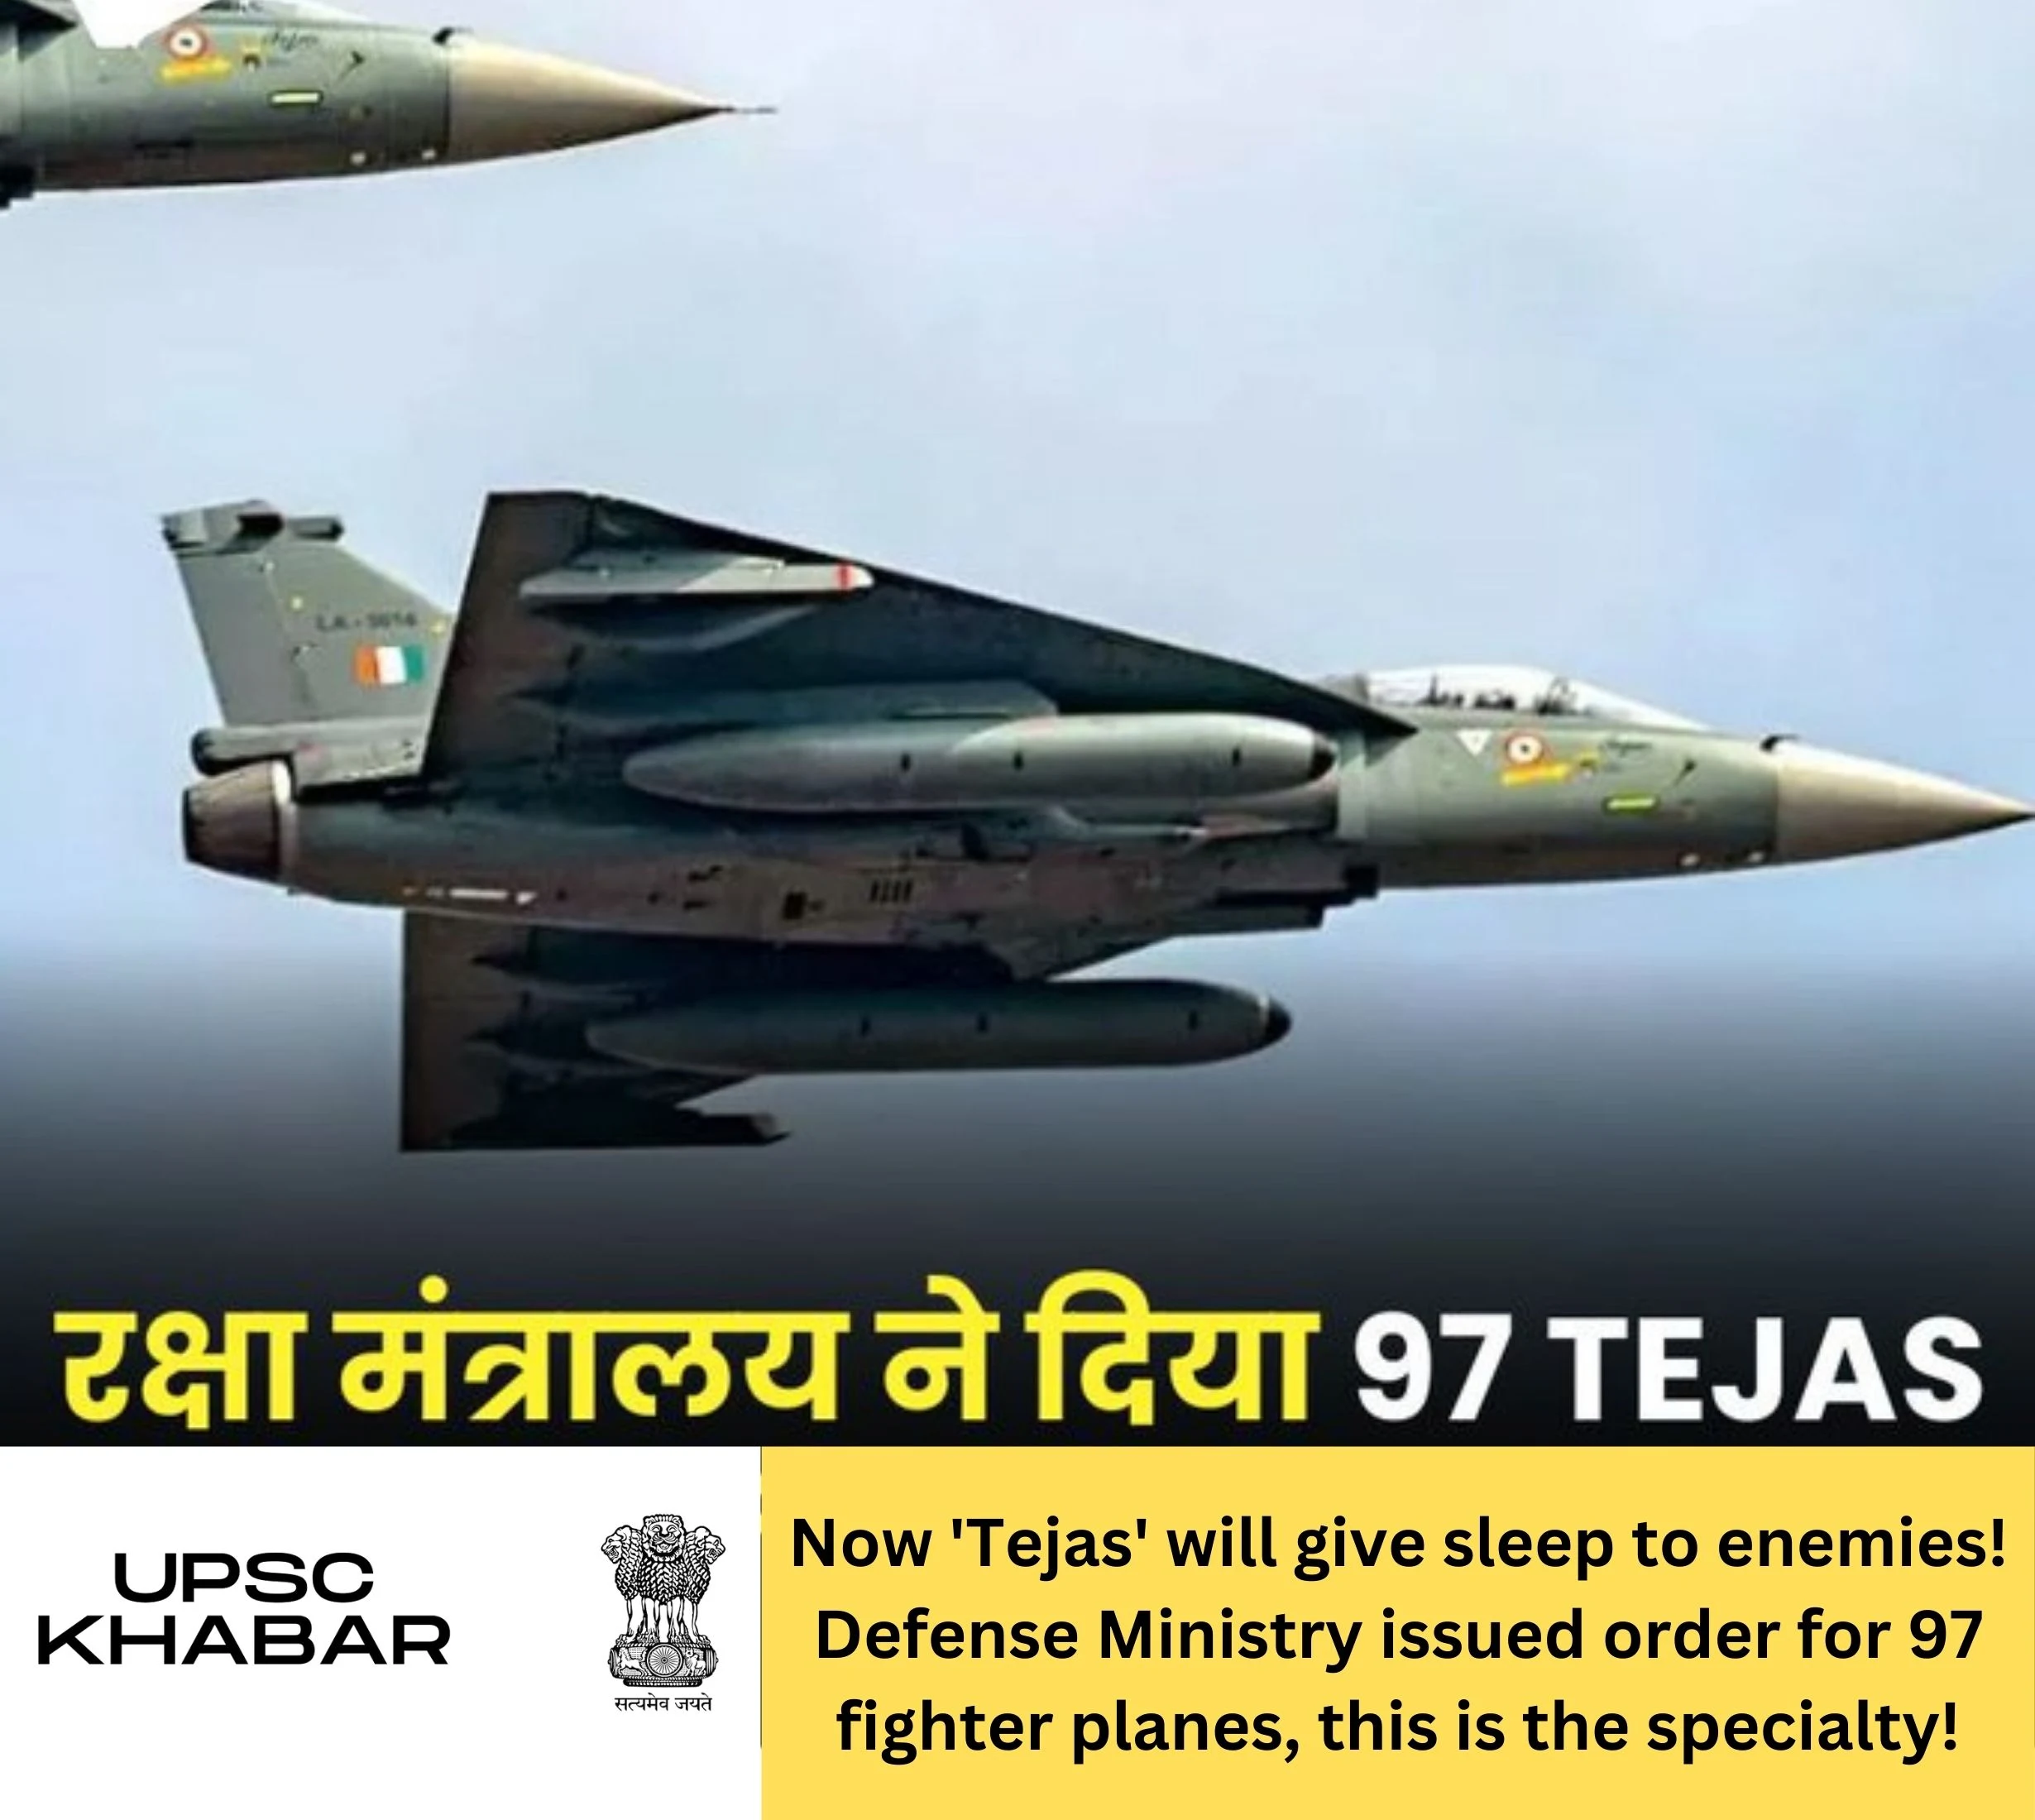 Now 'Tejas' will give sleep to enemies! Defense Ministry issued order for 97 fighter planes, this is the specialty!